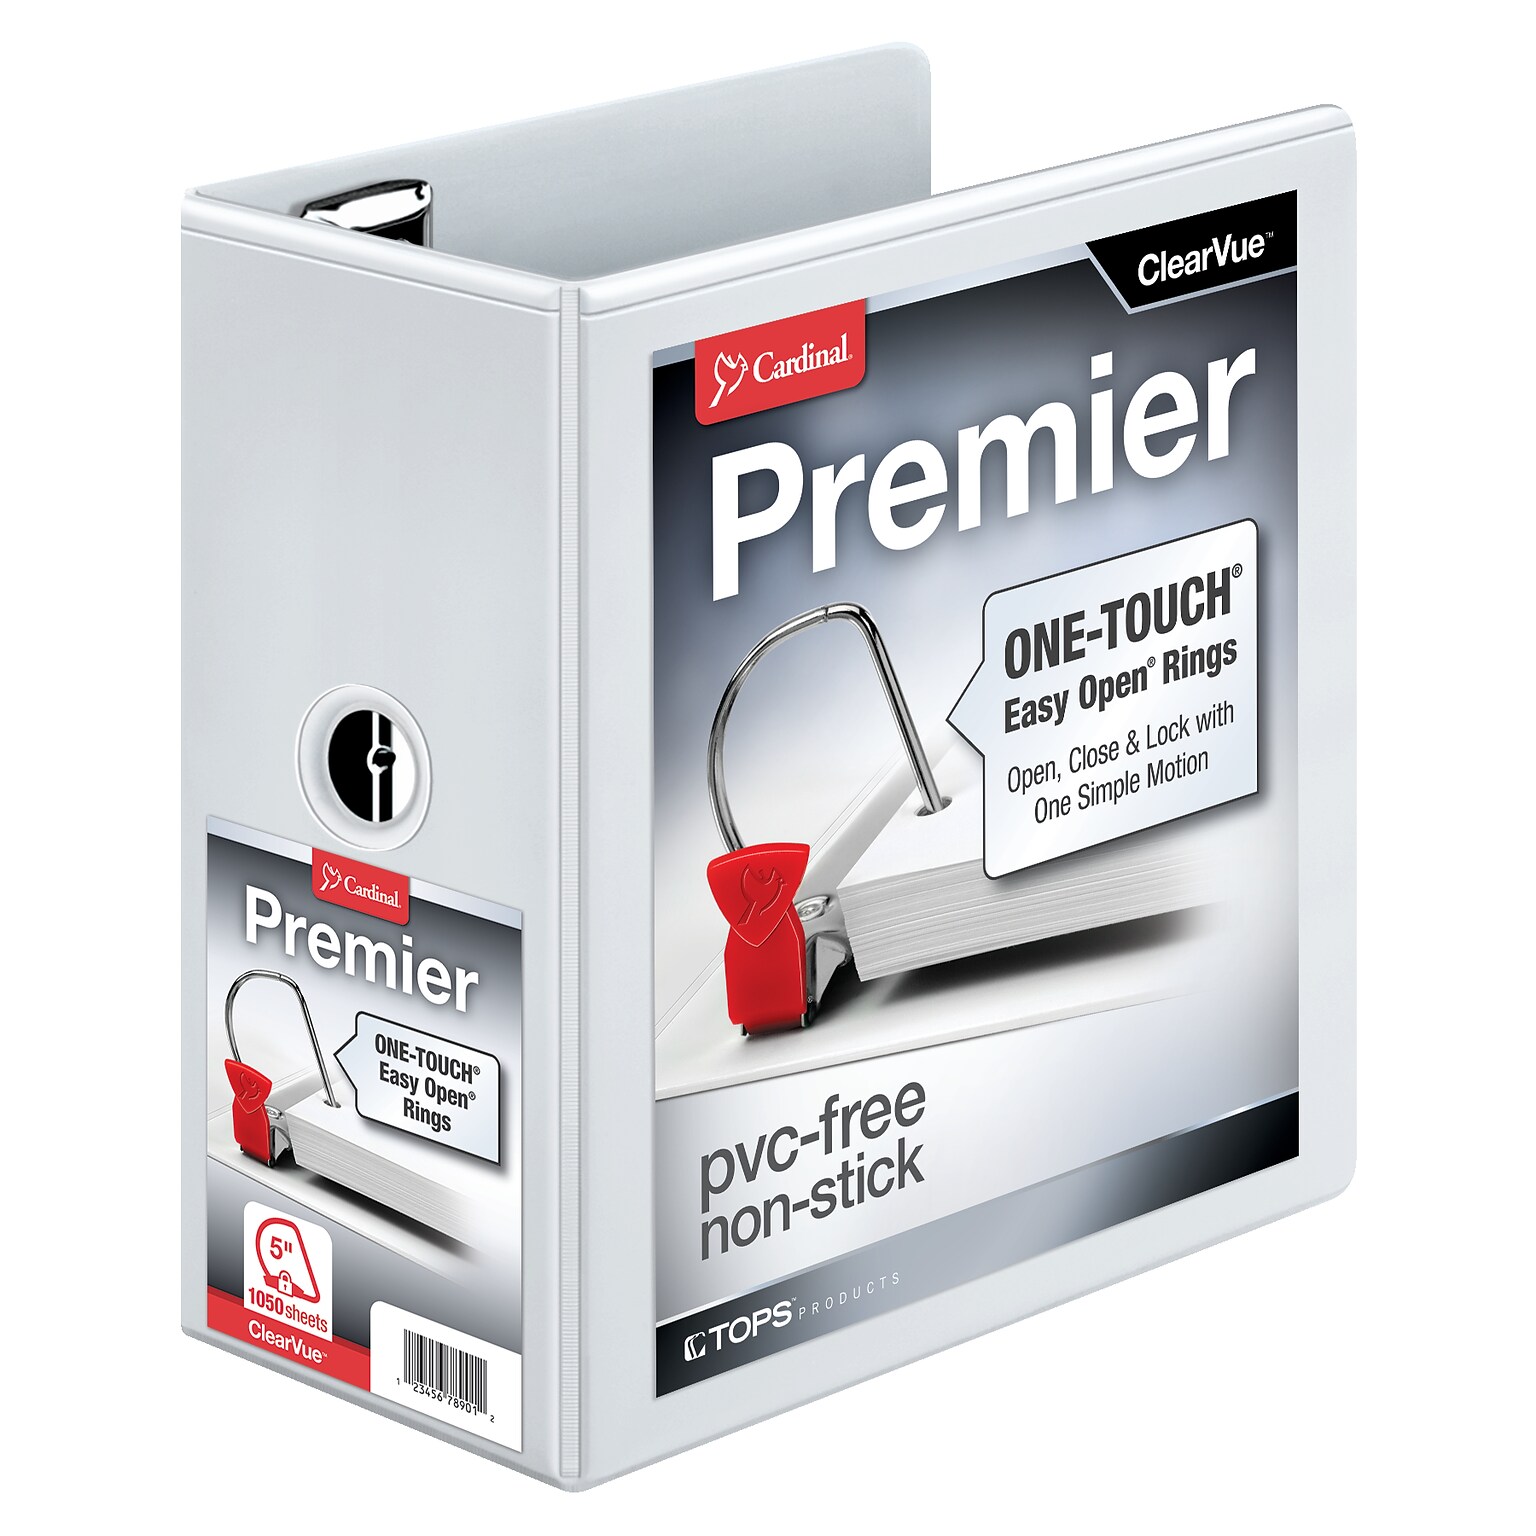 Cardinal Premier ClearVue 5 3-Ring View Binders, D-Ring, White (10350CB)